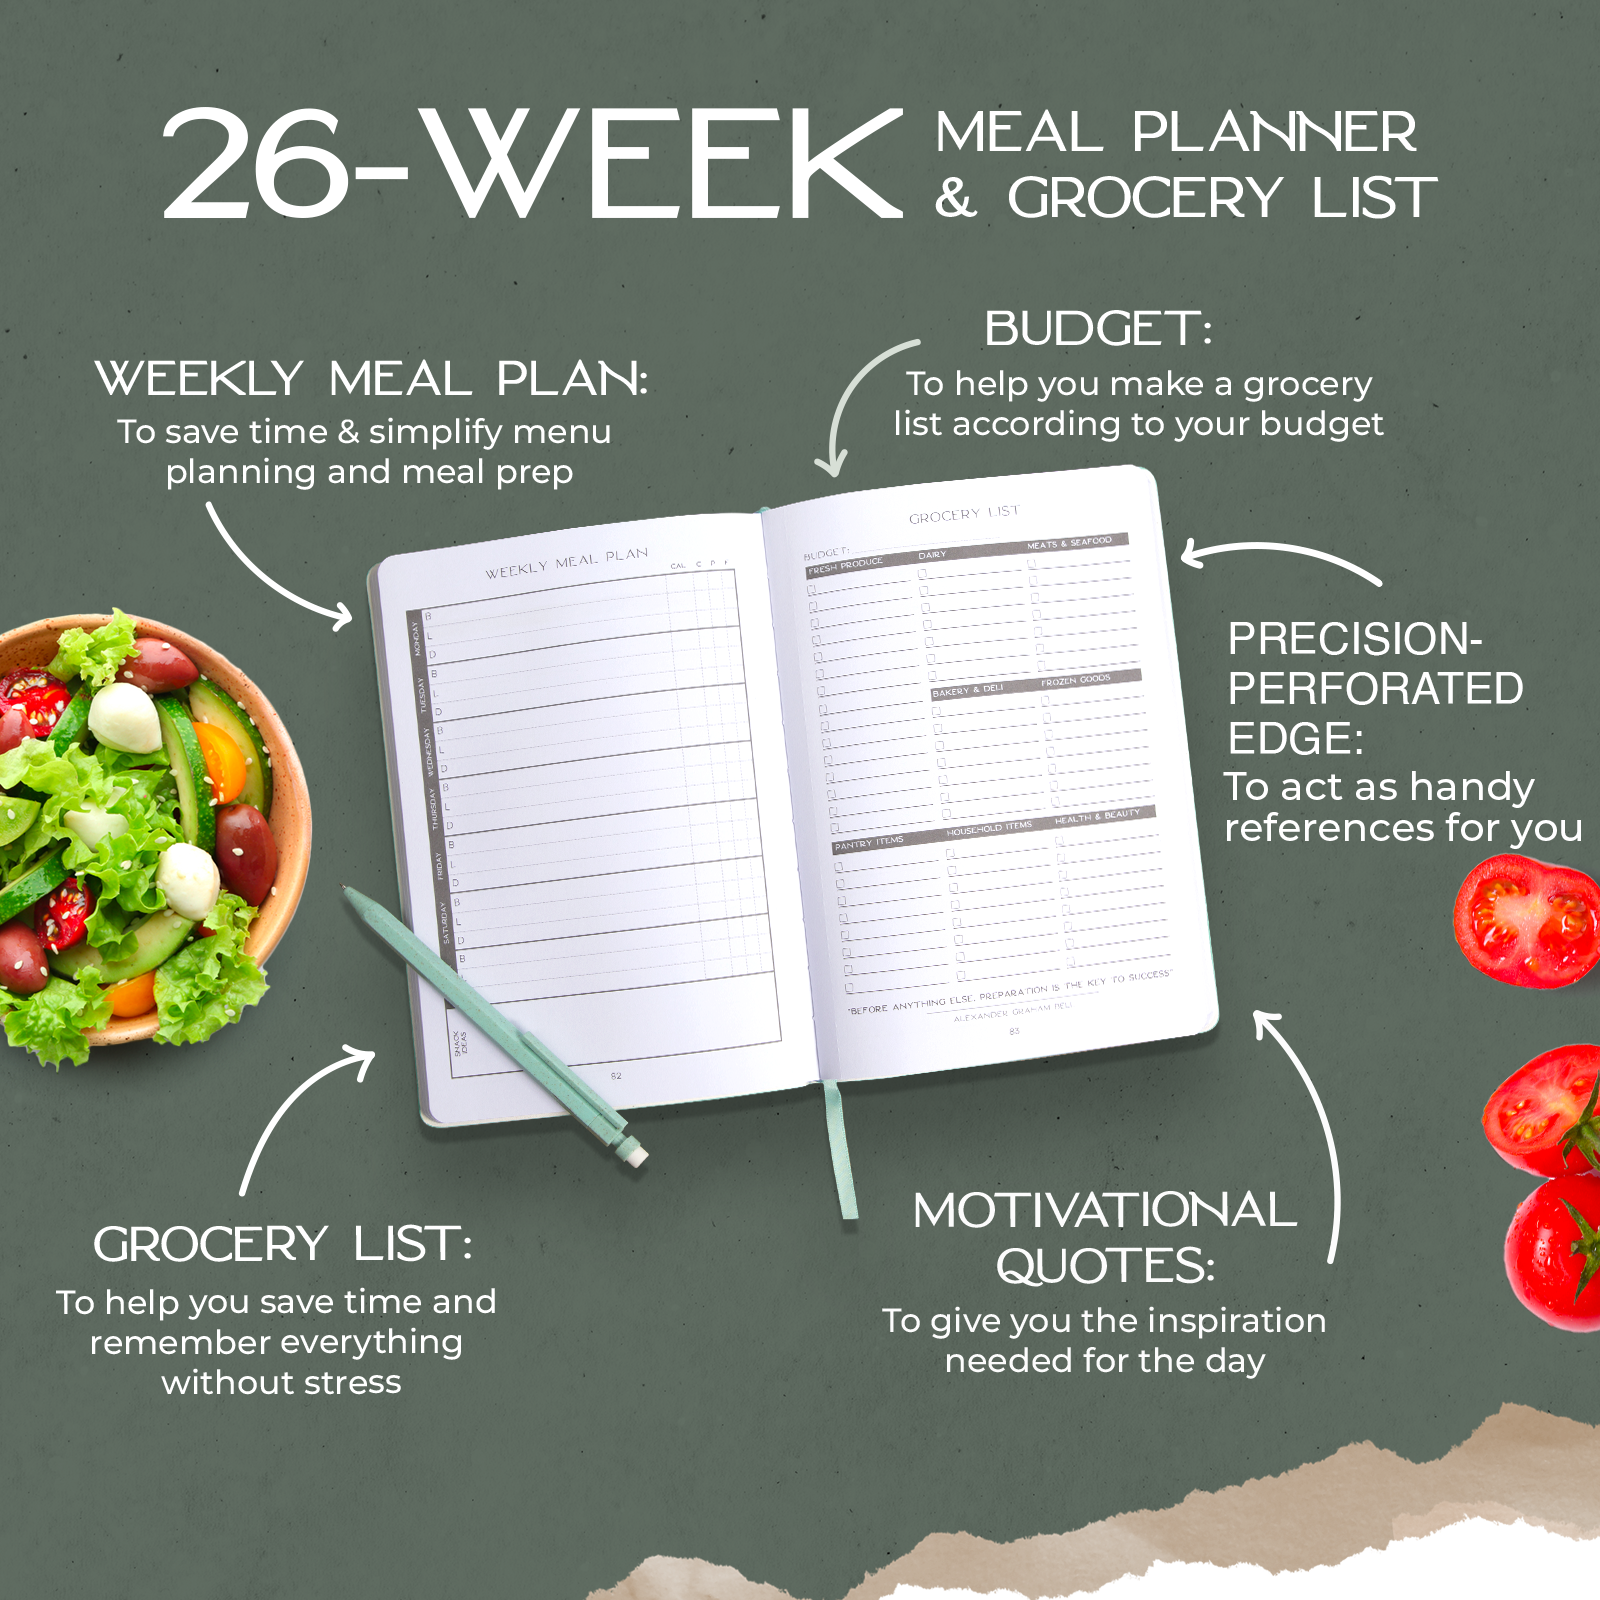 Weekly Meal Planner and Fitness Tracker - Log Workouts, Track Food & Macros